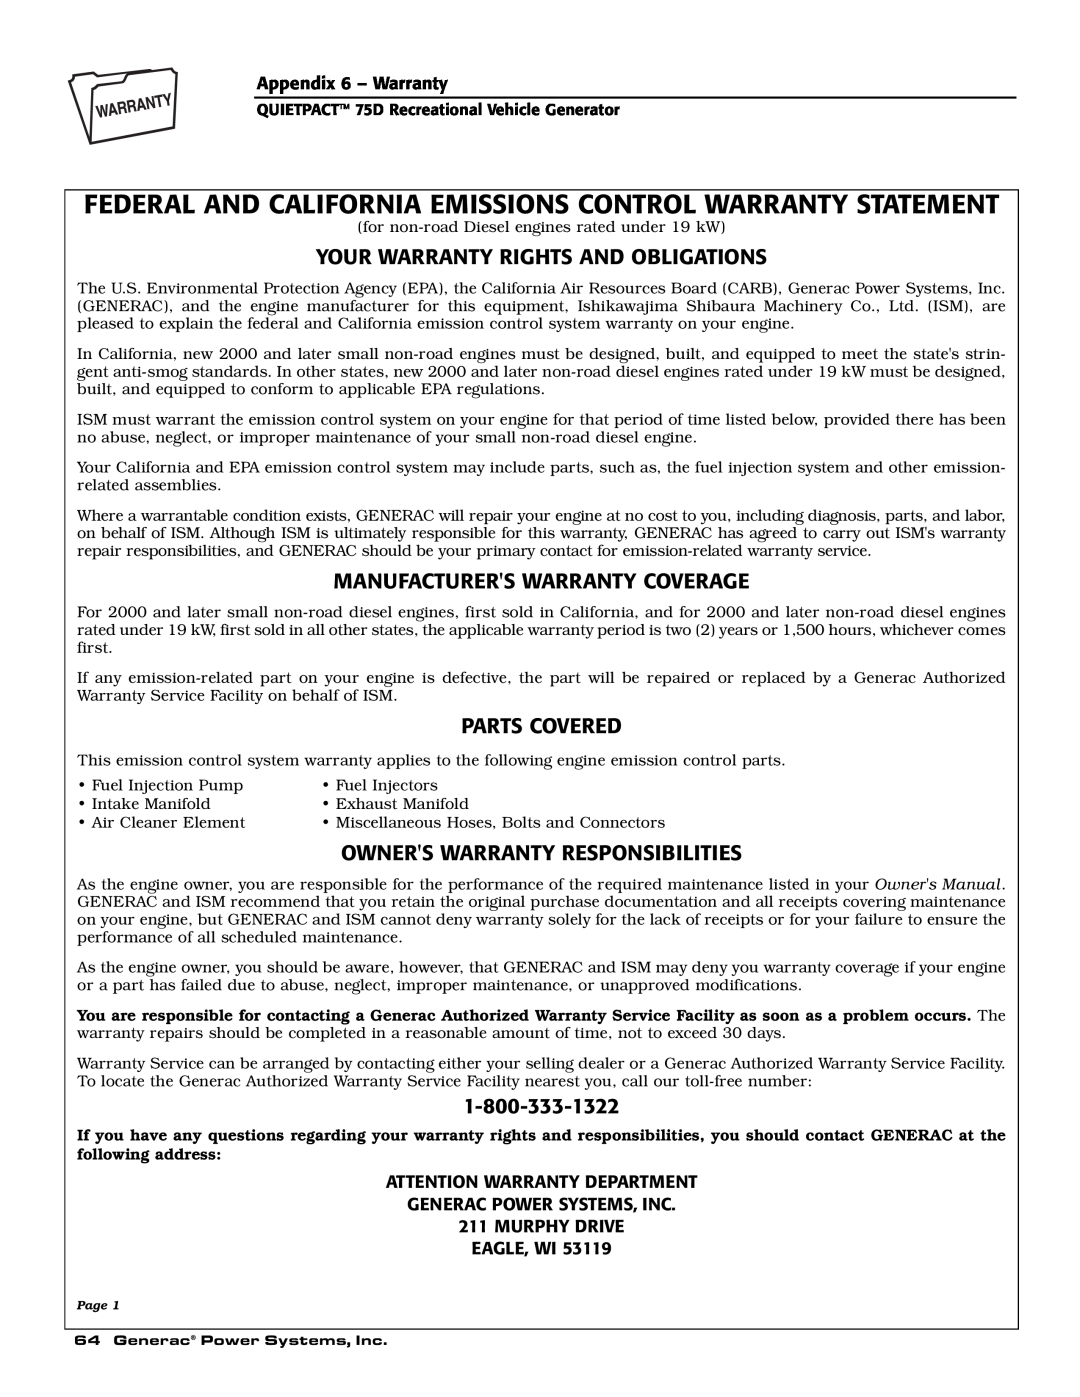 Guardian Technologies 004270-2 owner manual Federal And California Emissions Control Warranty Statement, Parts Covered 